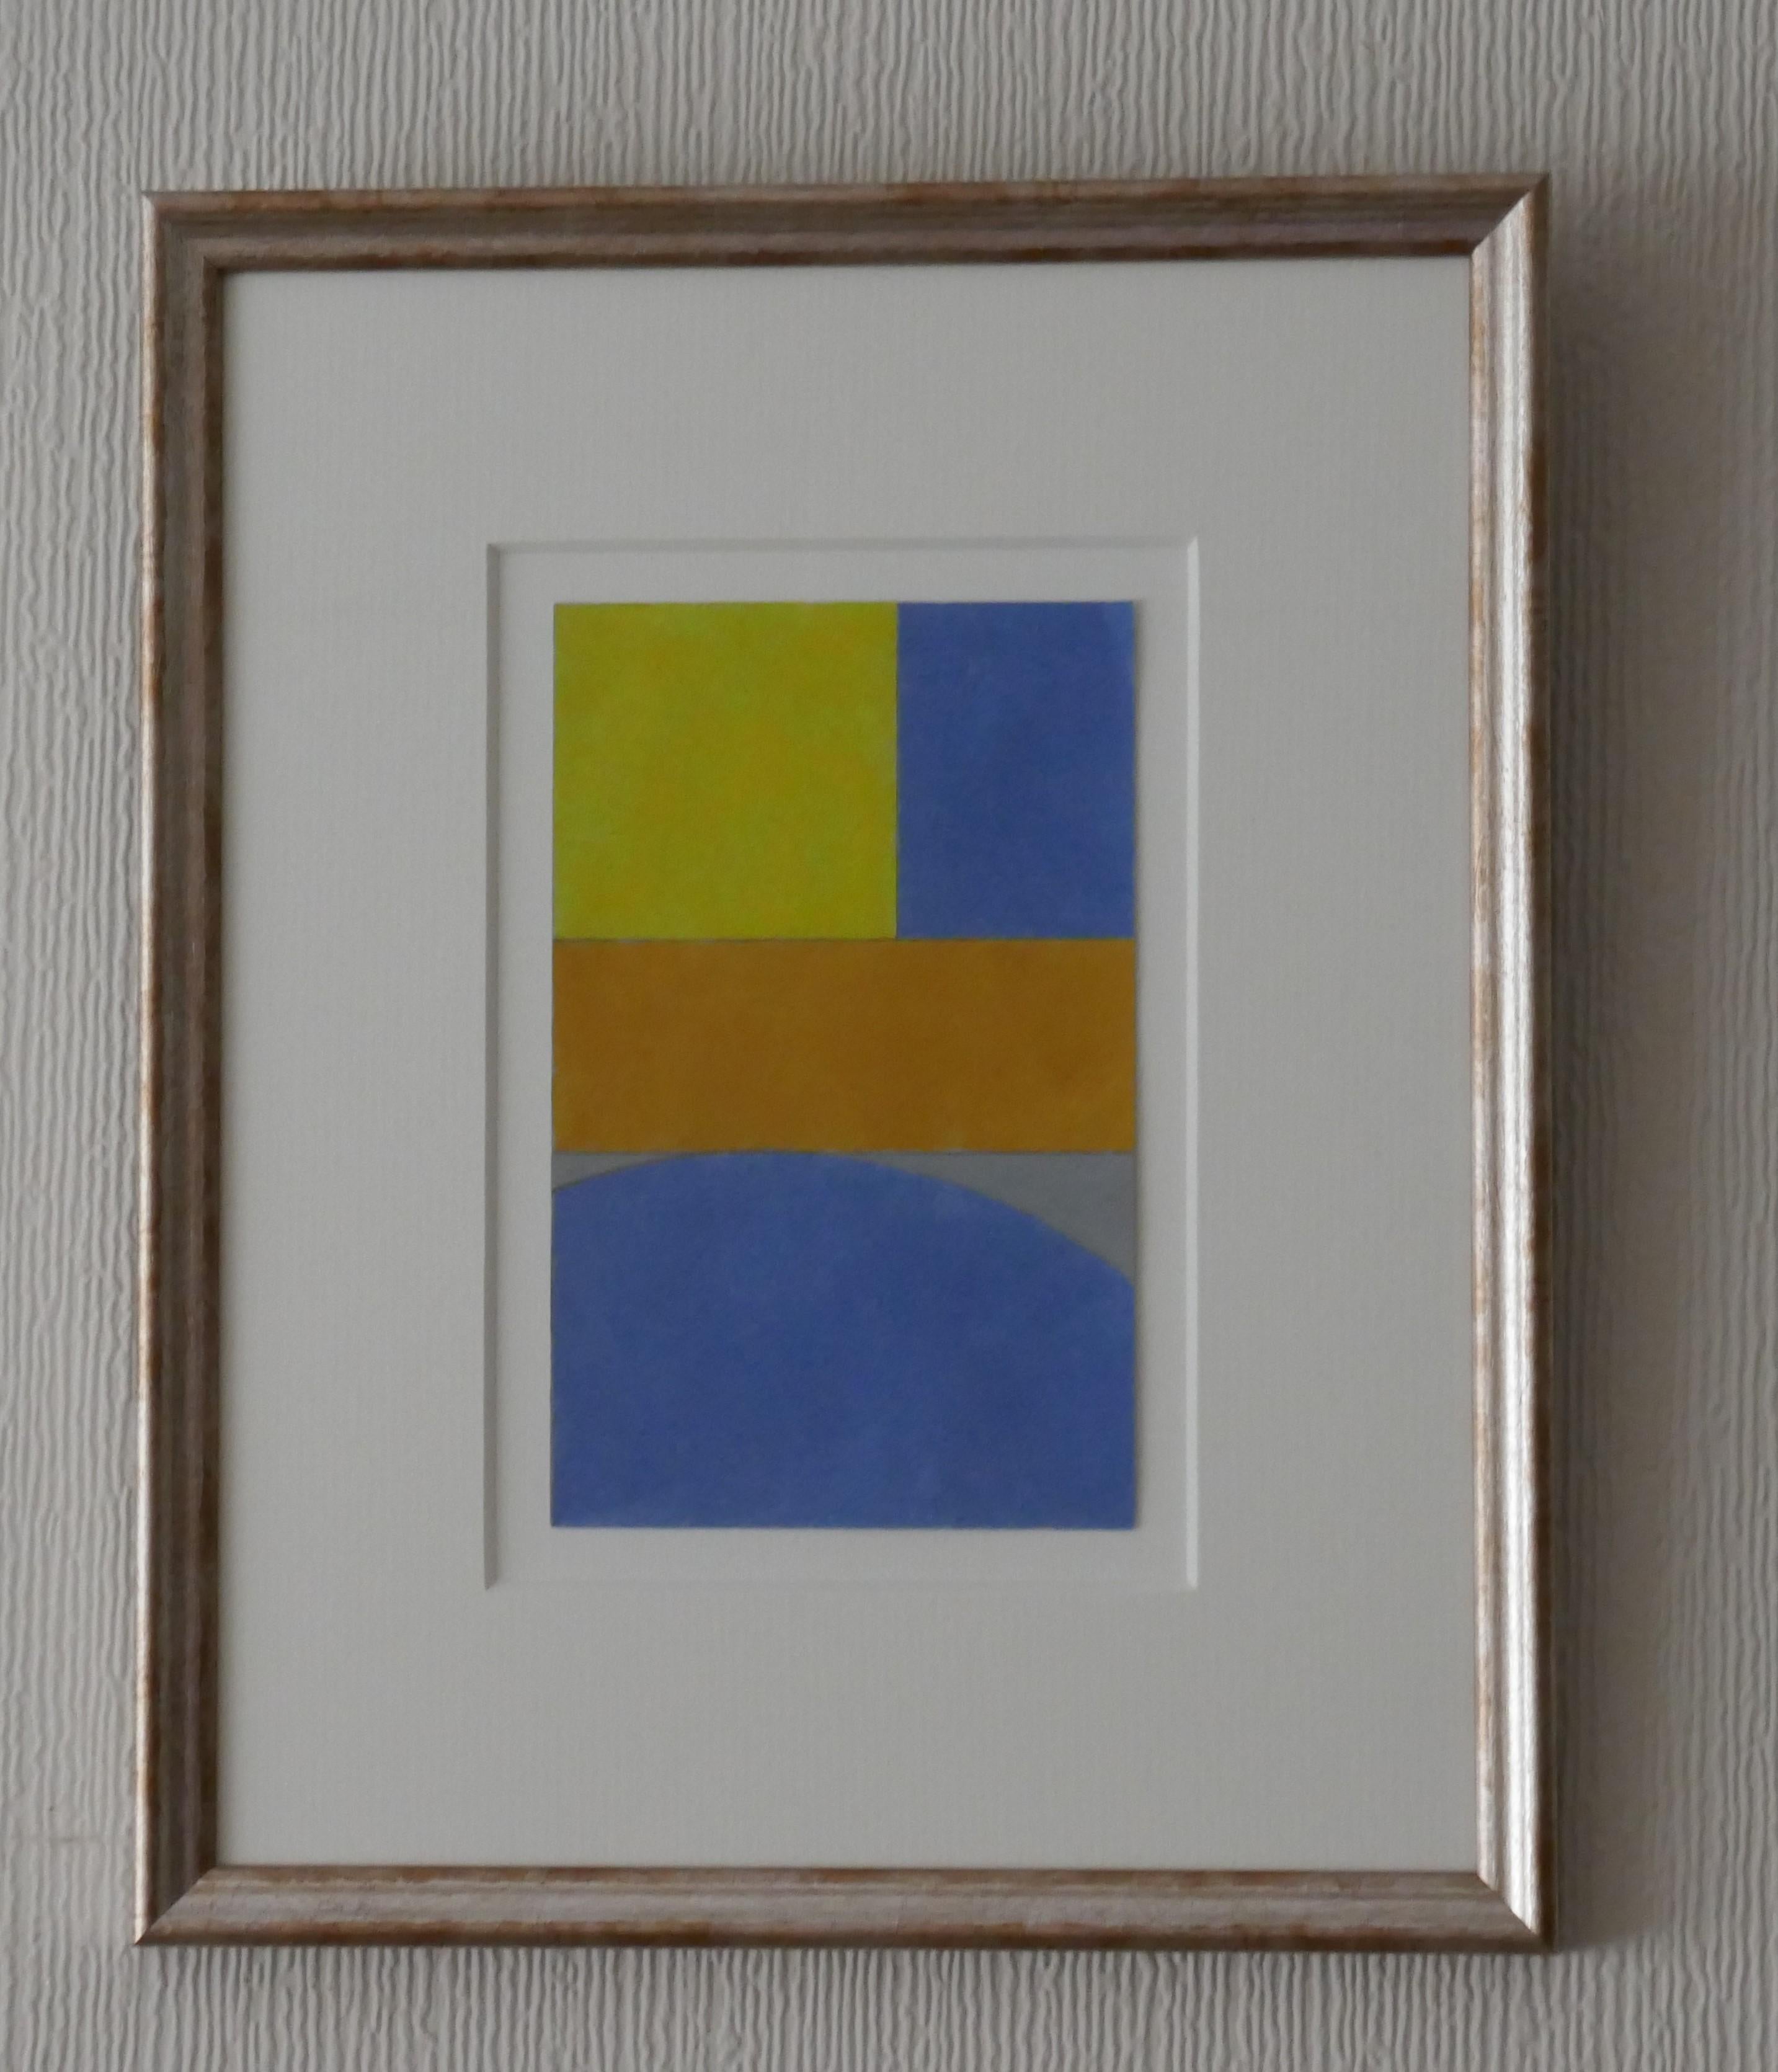 George Dannatt (1915-2009)
Untitled, 2004
Image: 17.8 x 11.2 cm
Frame: 34.6 x 27.0 cm
George Dannatt Trust Estate stamped

George Dannatt’s long career as a painter and sculptor ended with the artist’s death in 2009 at the age of 94.  He was a